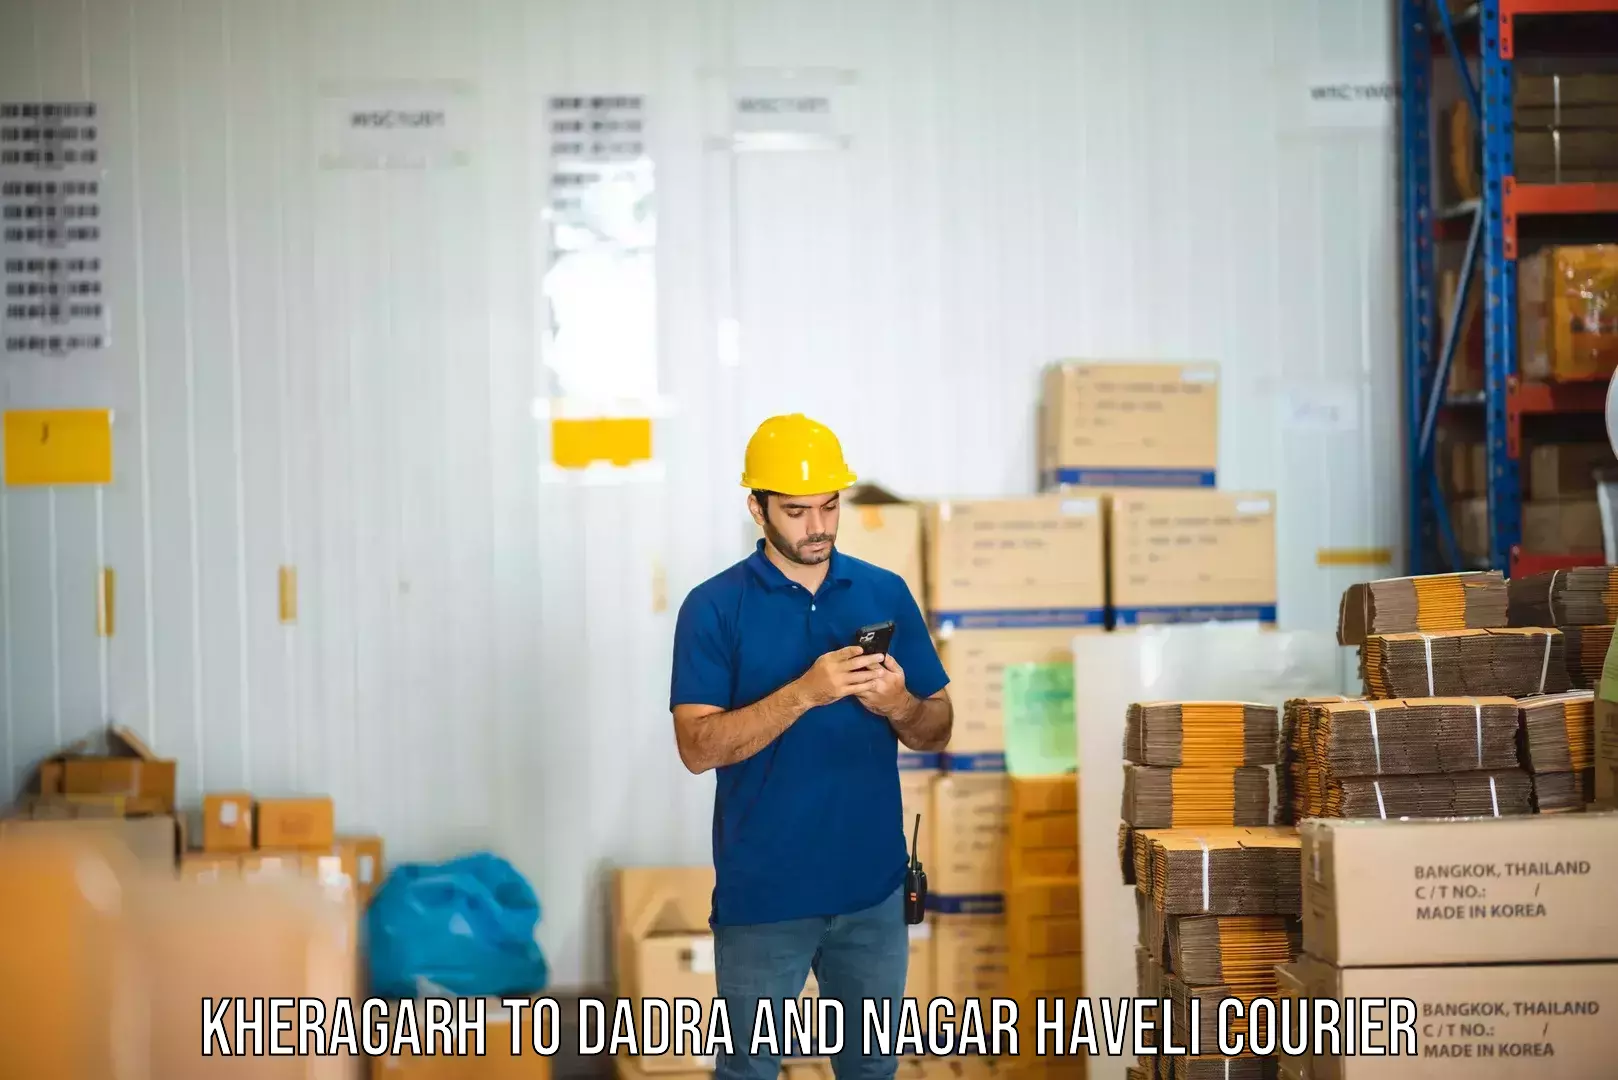 State-of-the-art courier technology Kheragarh to Dadra and Nagar Haveli